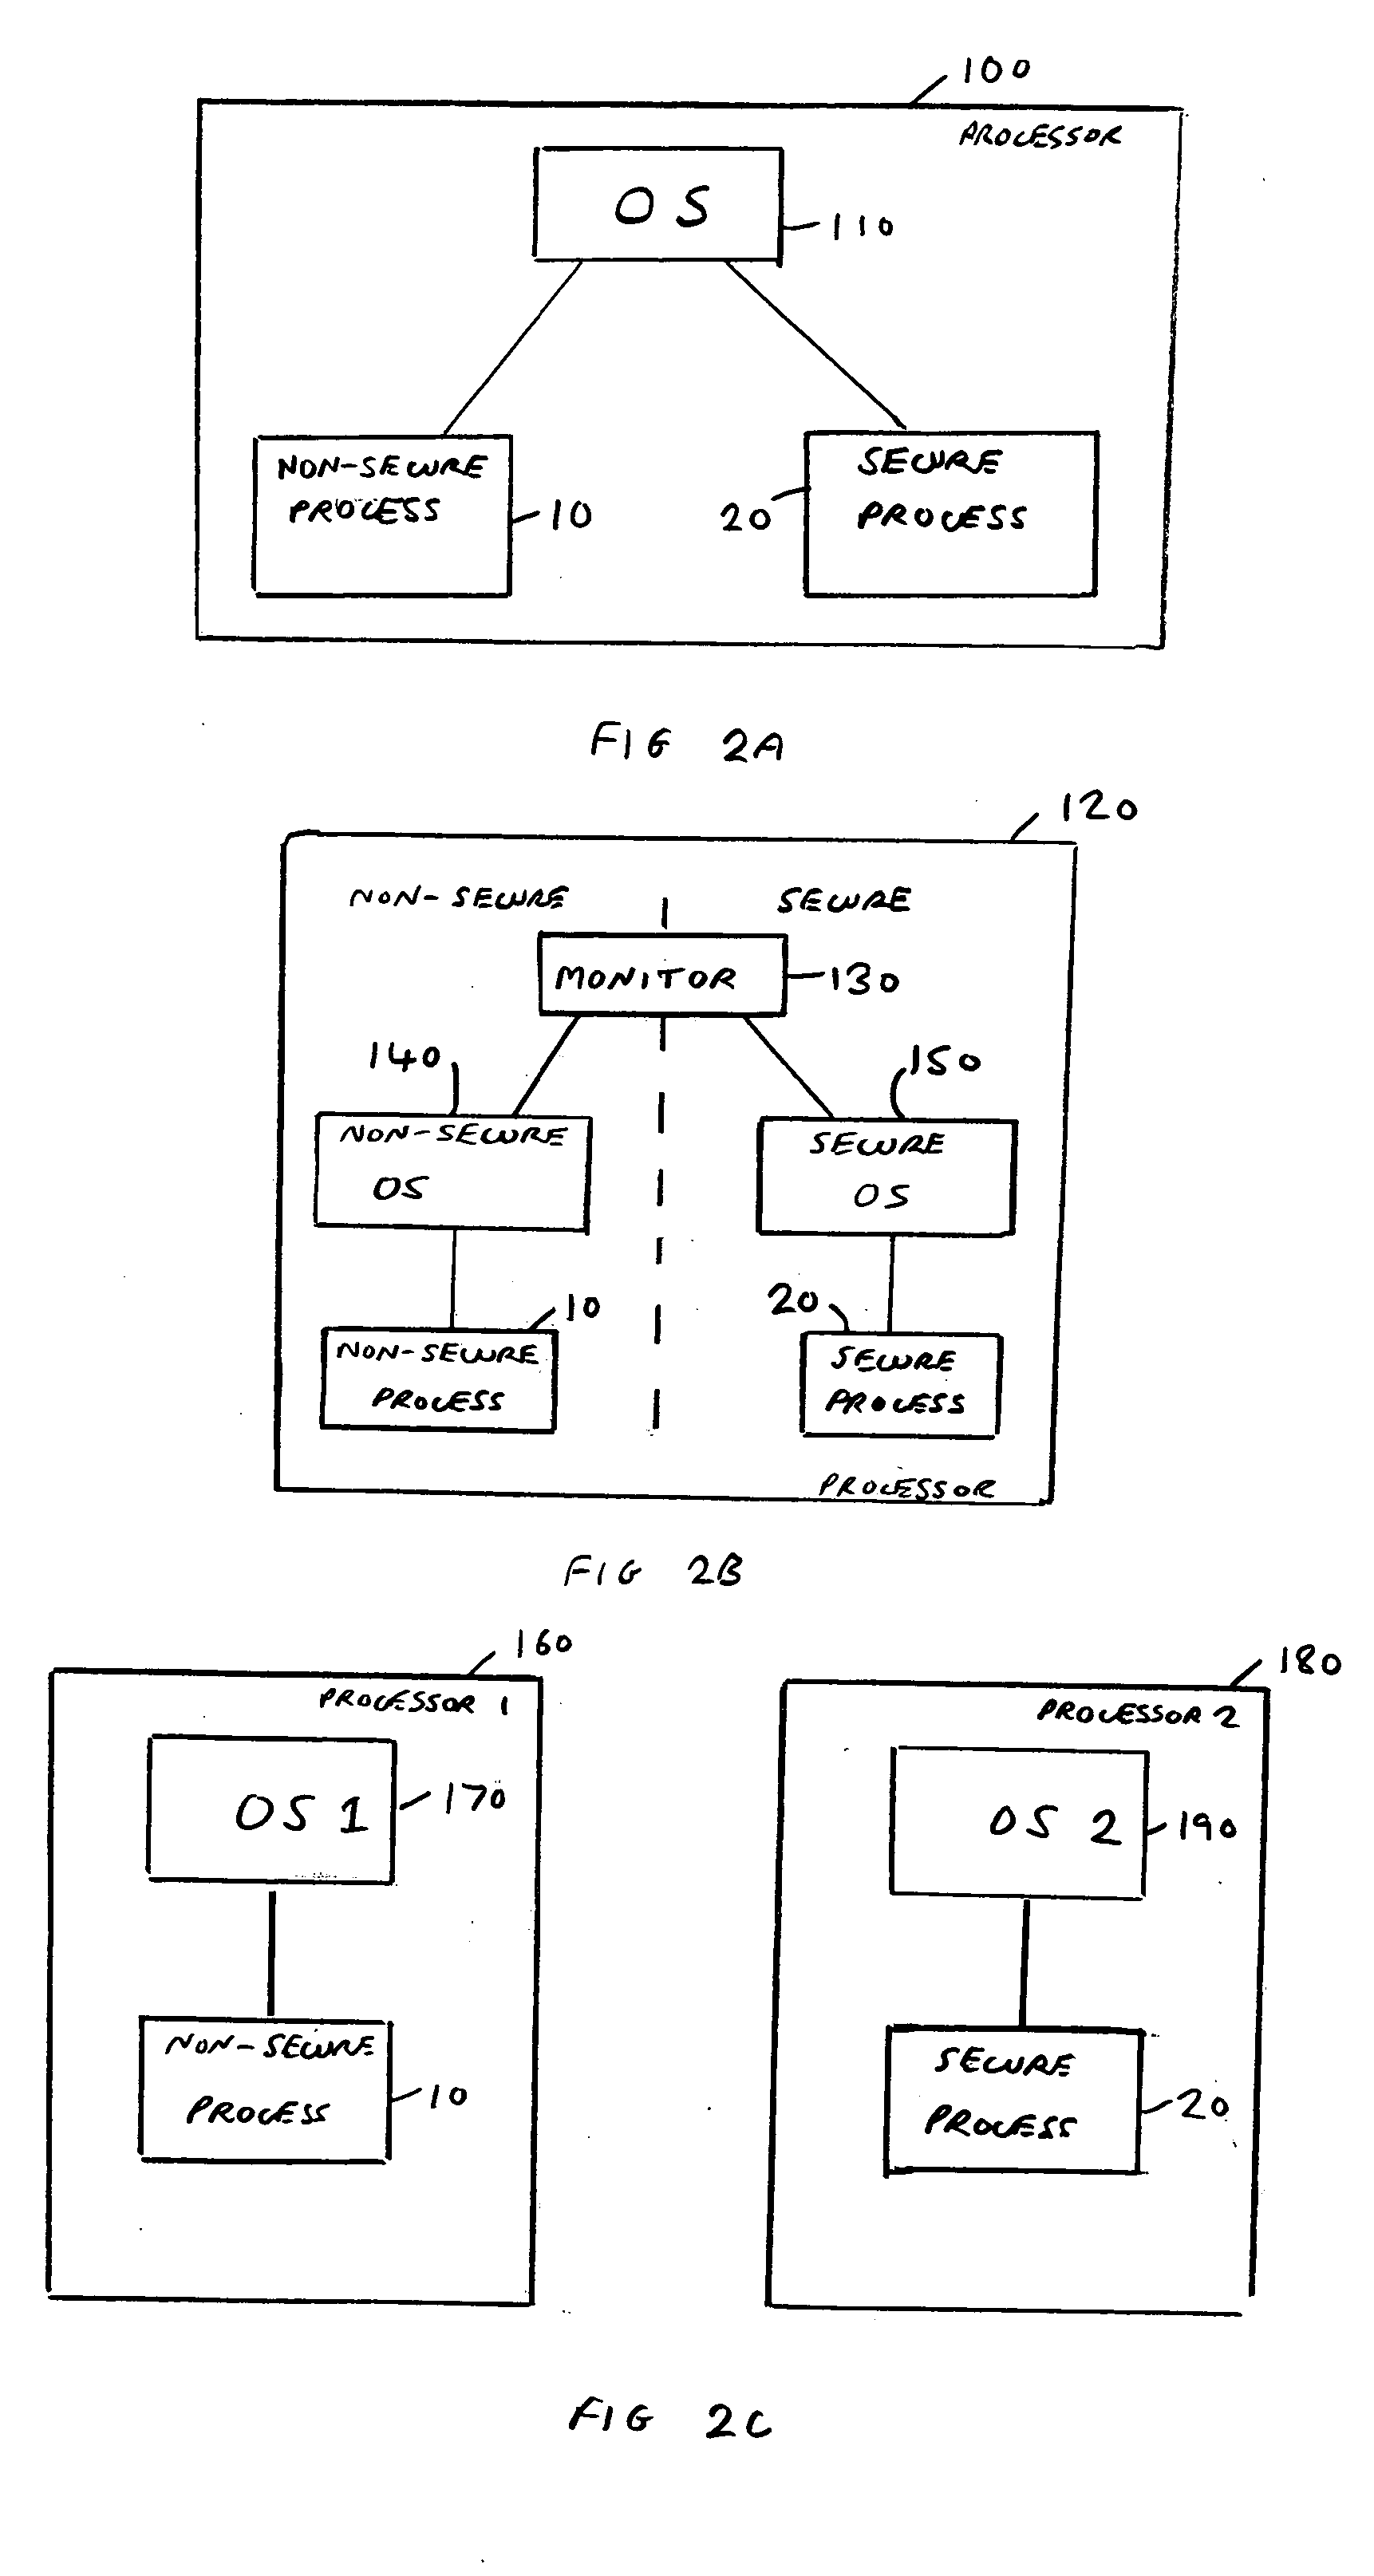 Data processing apparatus and method for merging secure and non-secure data into an output data stream